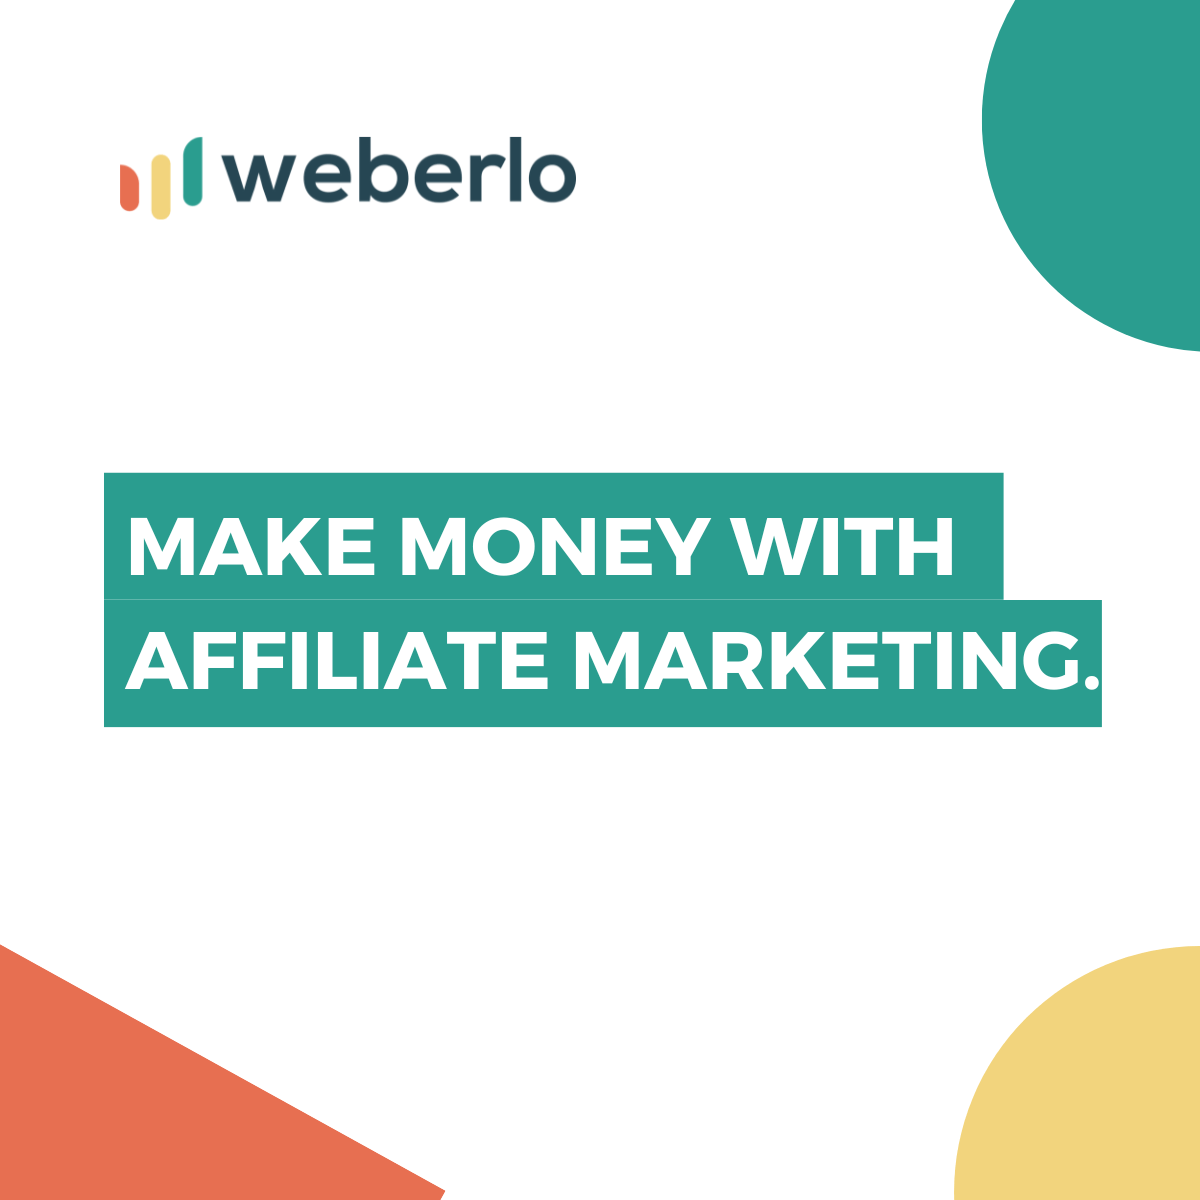 How To Make Money With Affiliated Marketing